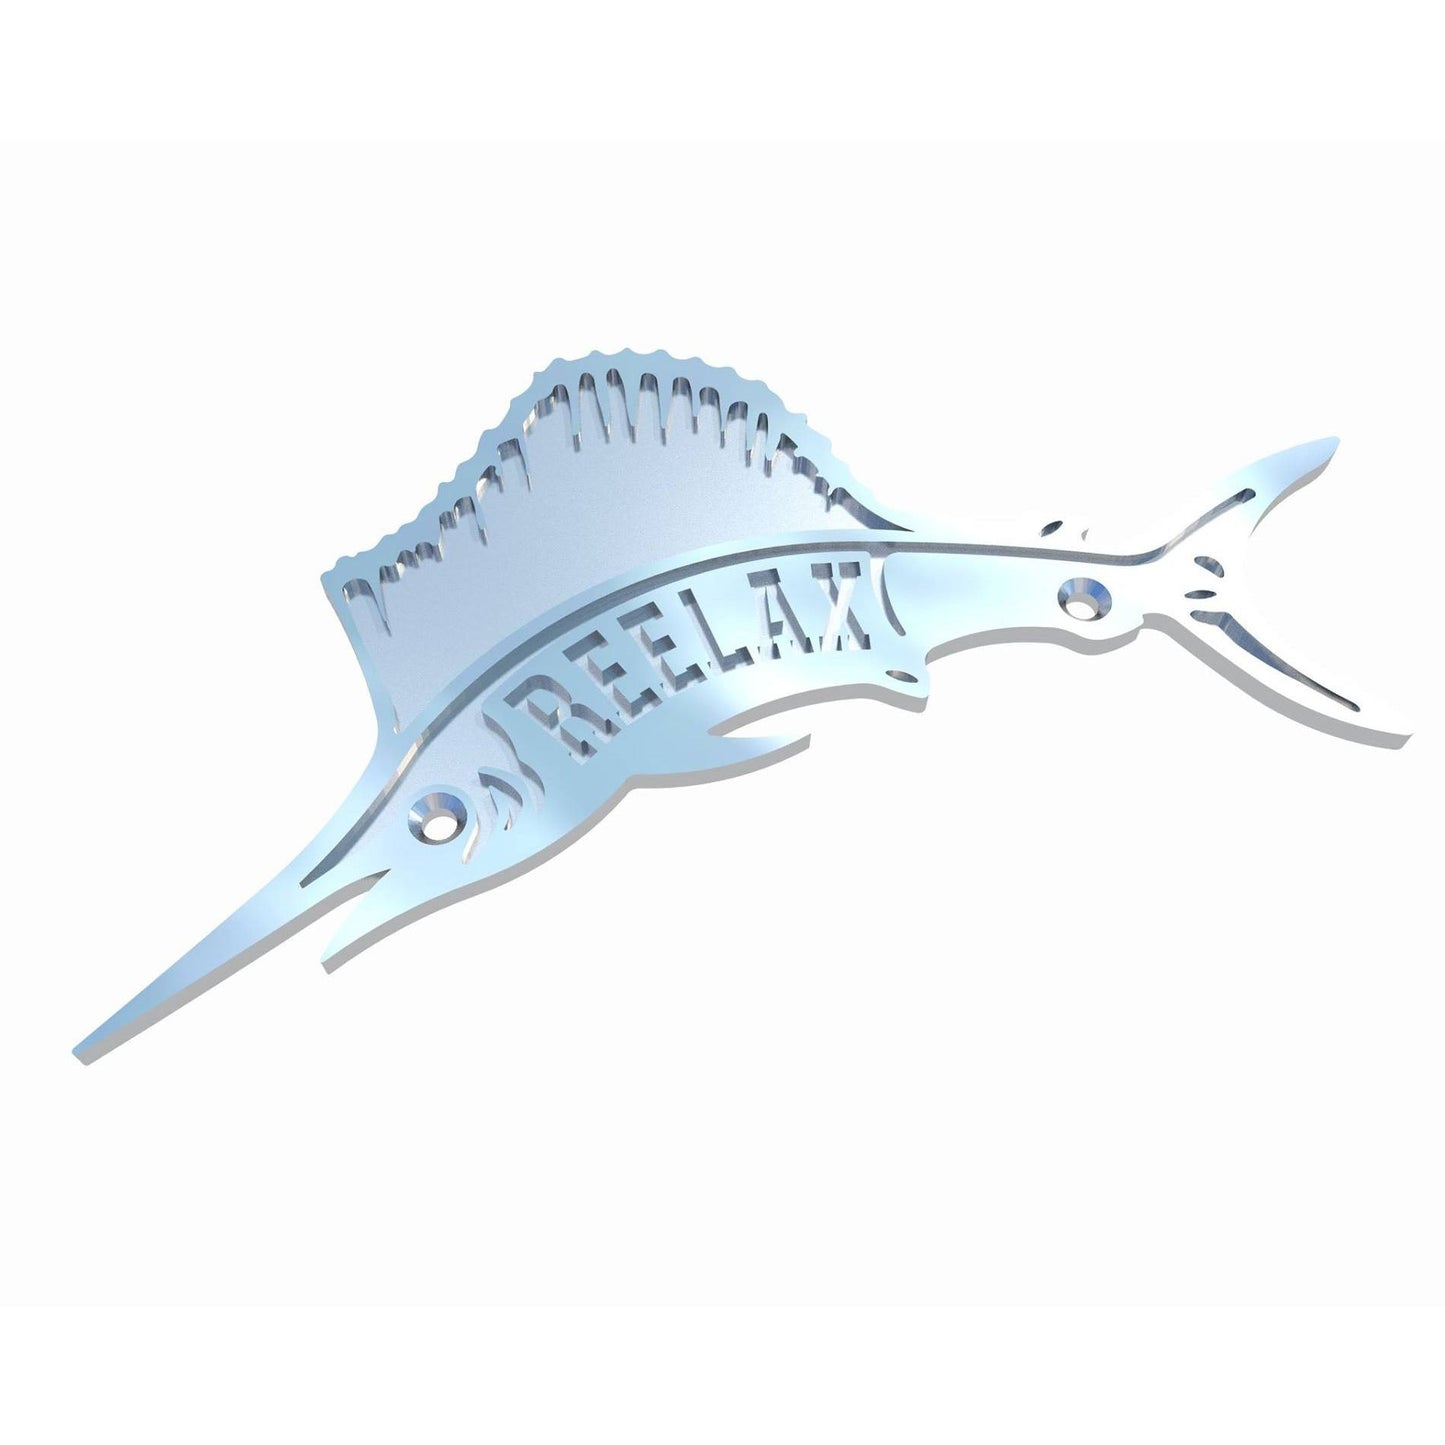 Reelax Stainless Steel Decal-Accessories - Boating-Reelax-Fishing Station